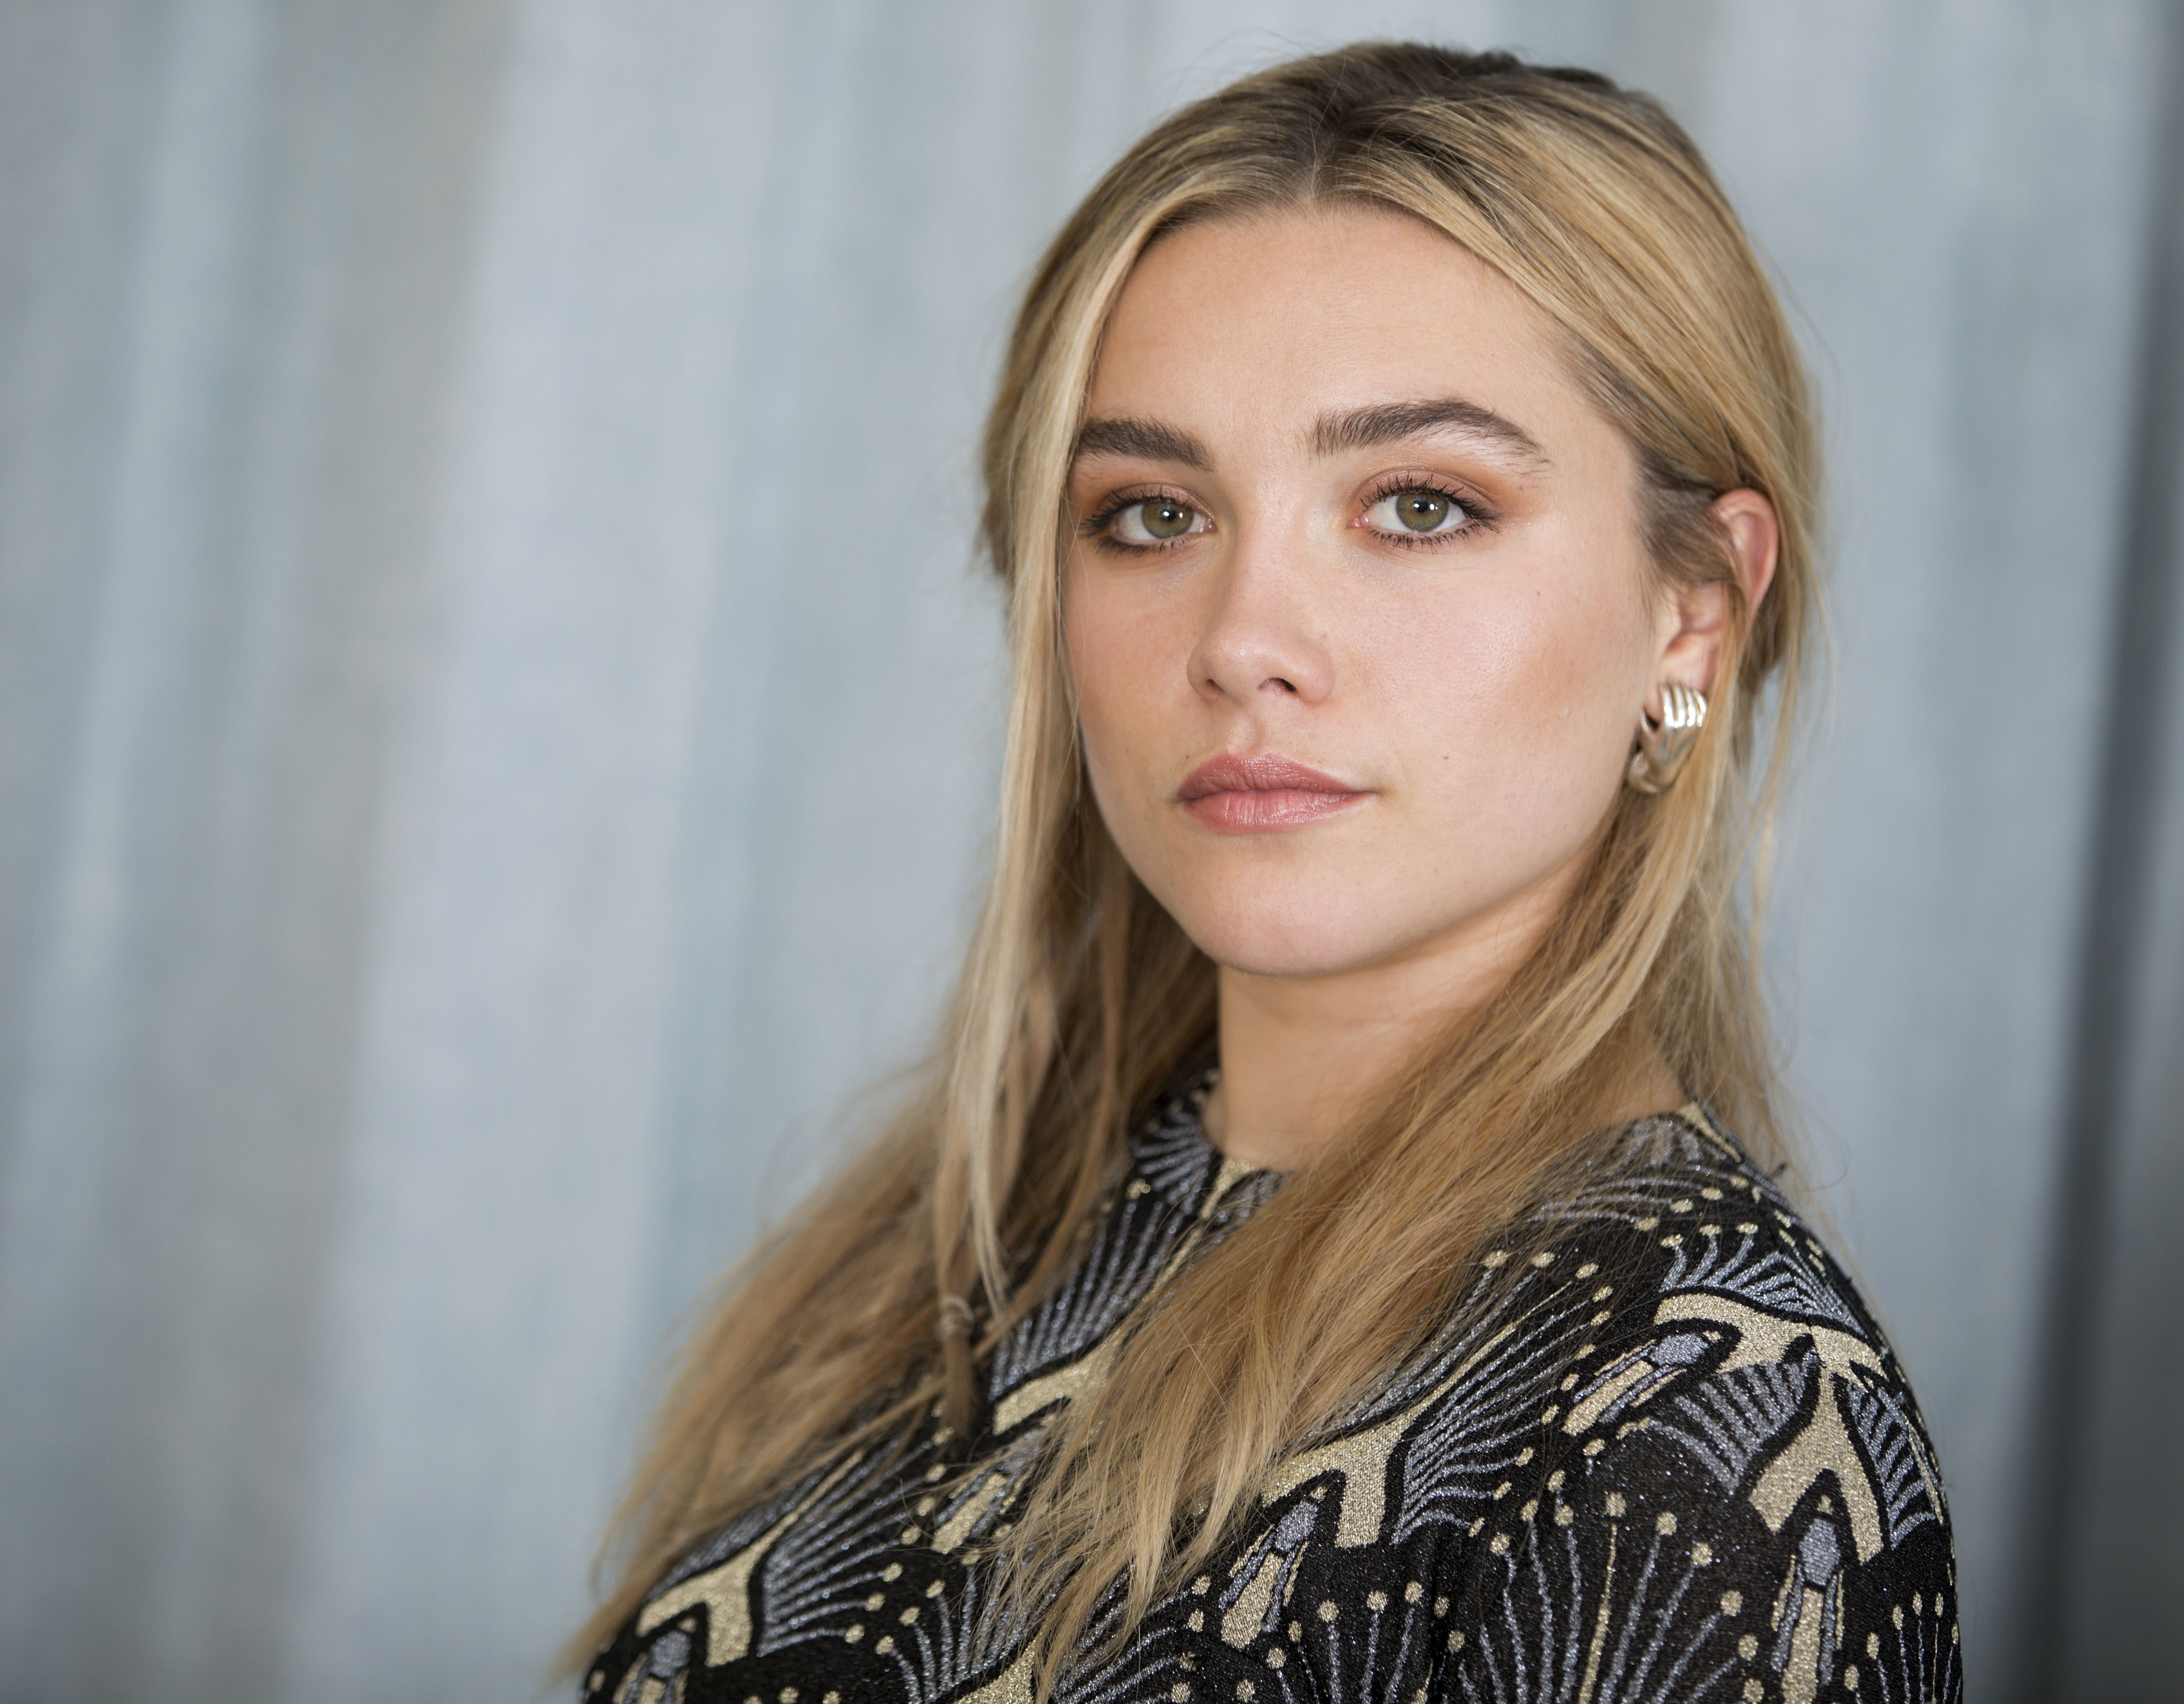 Florence Pugh: The Rising Star of Hollywood